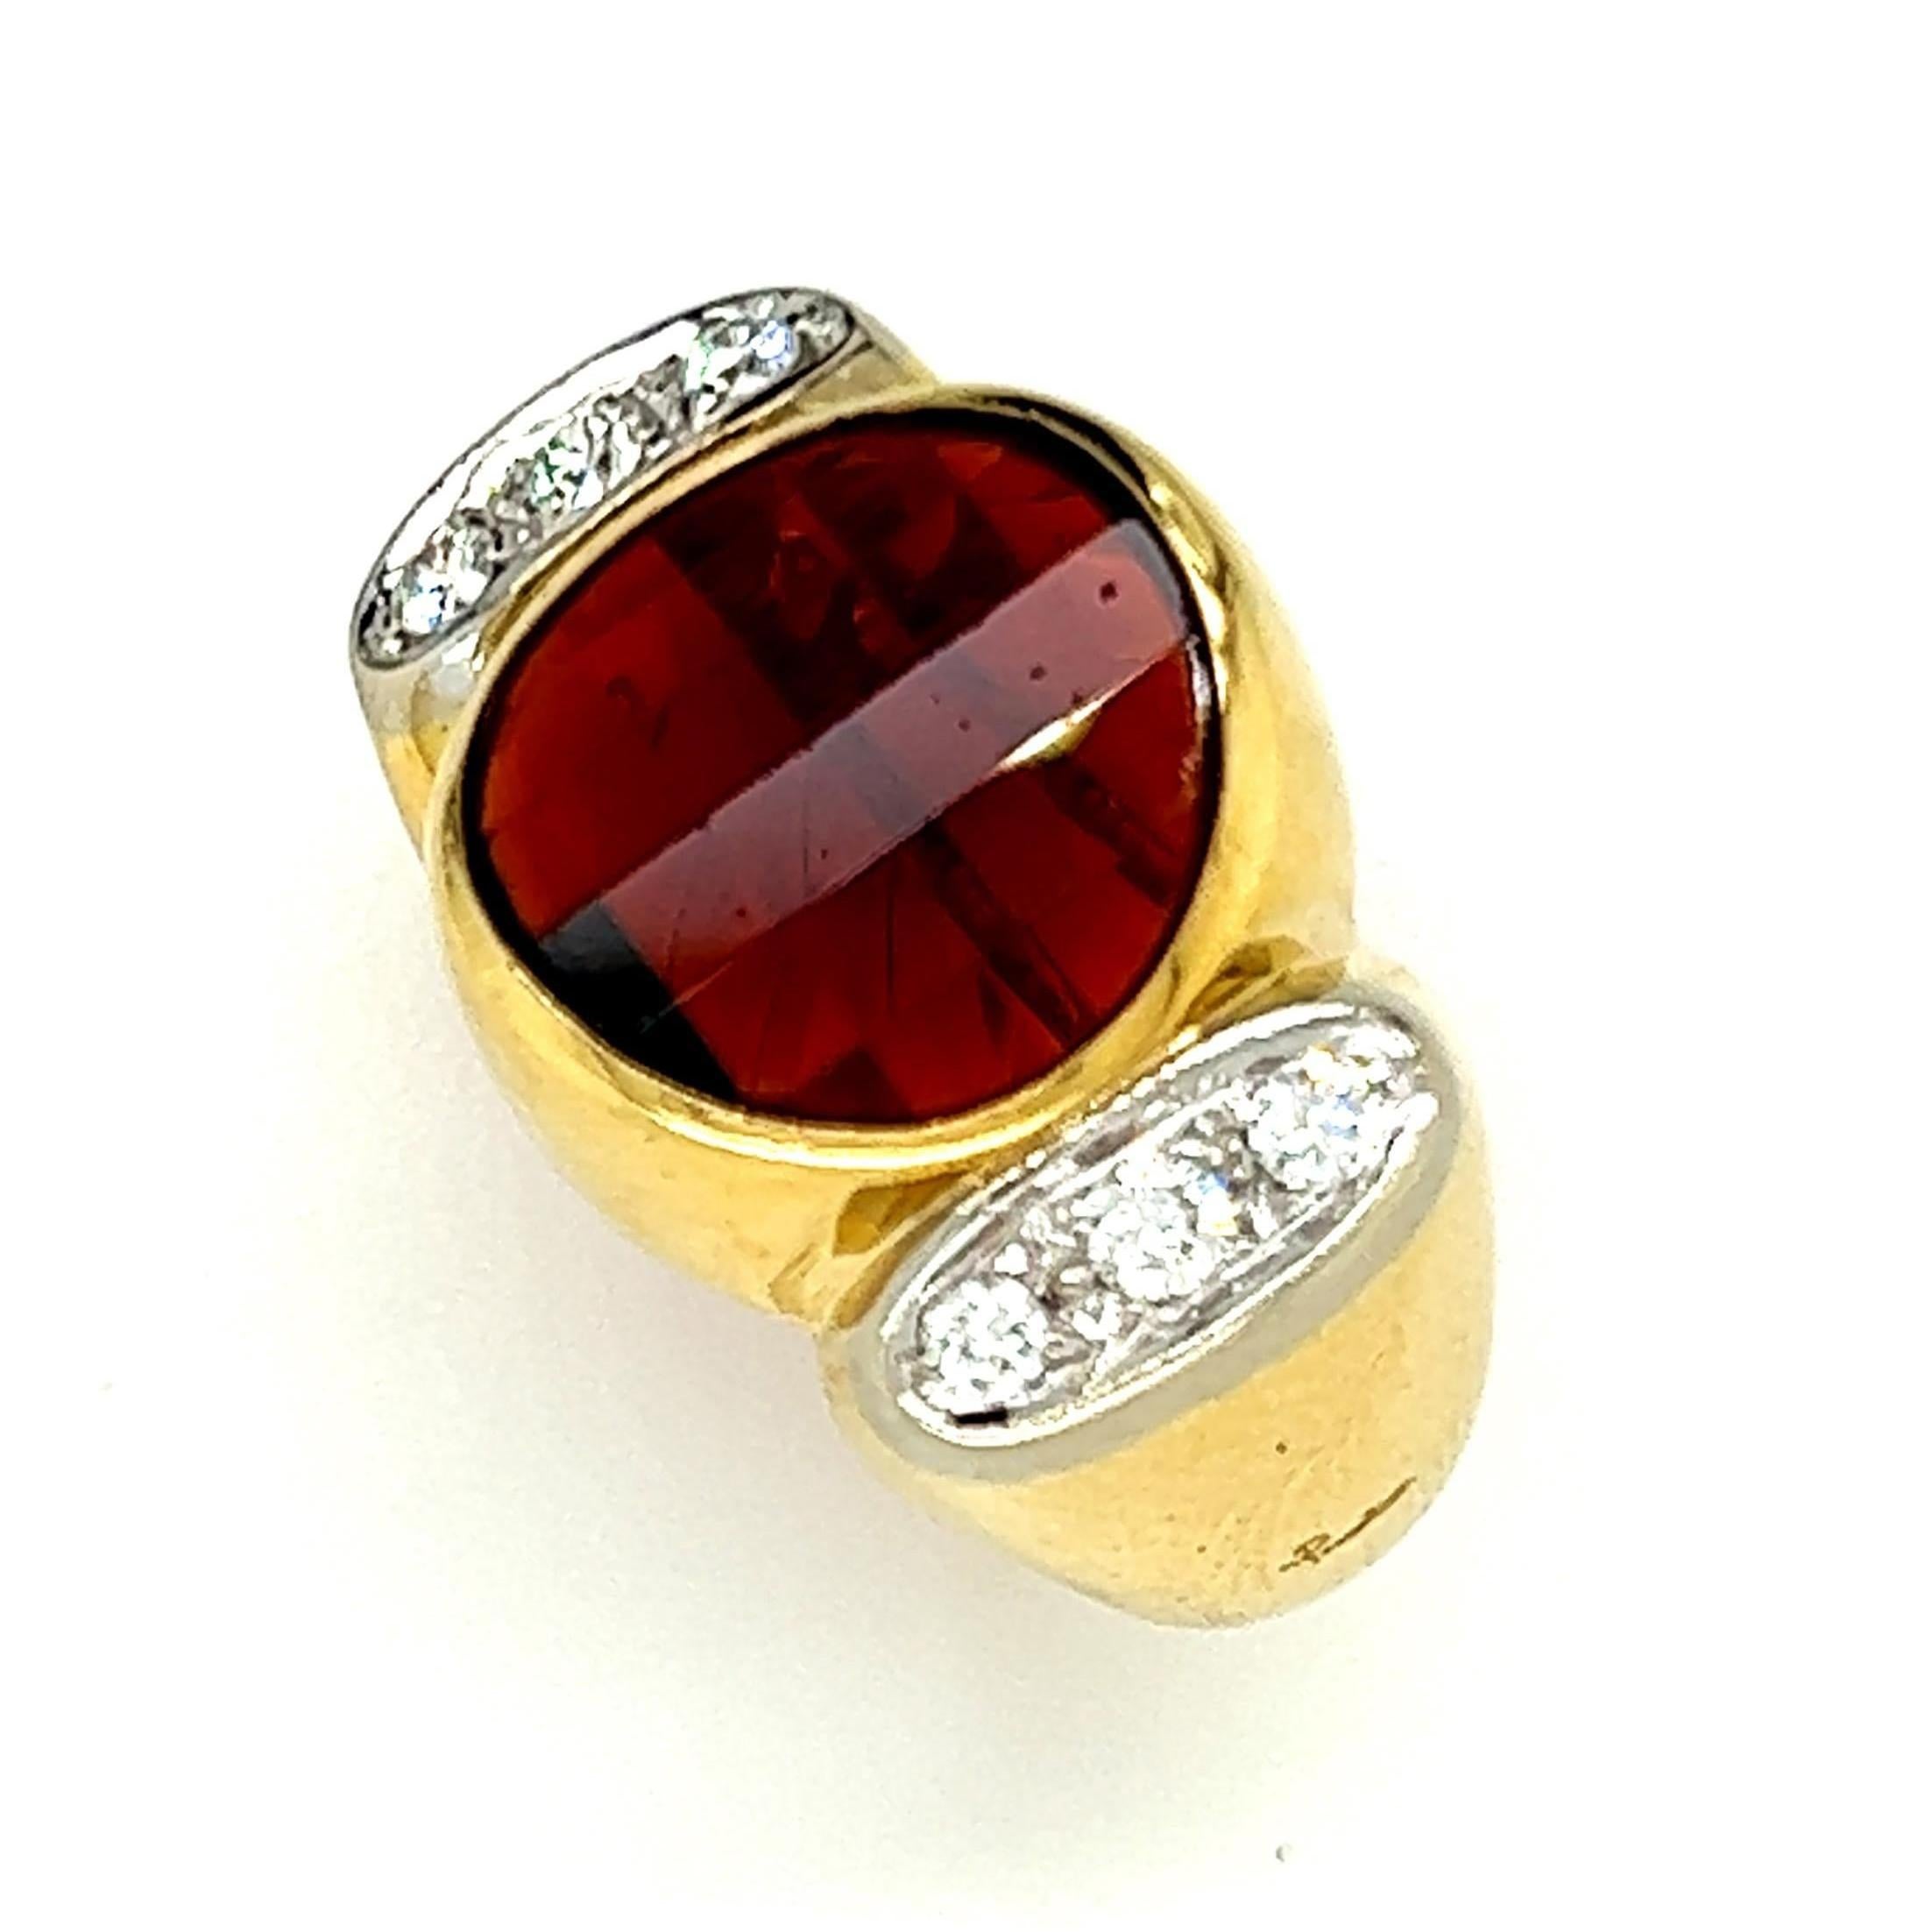 Original 1988 Pomellato A1136 White Diamond Red Garnet Yellow Gold Cocktail Ring In New Condition For Sale In Valenza, IT